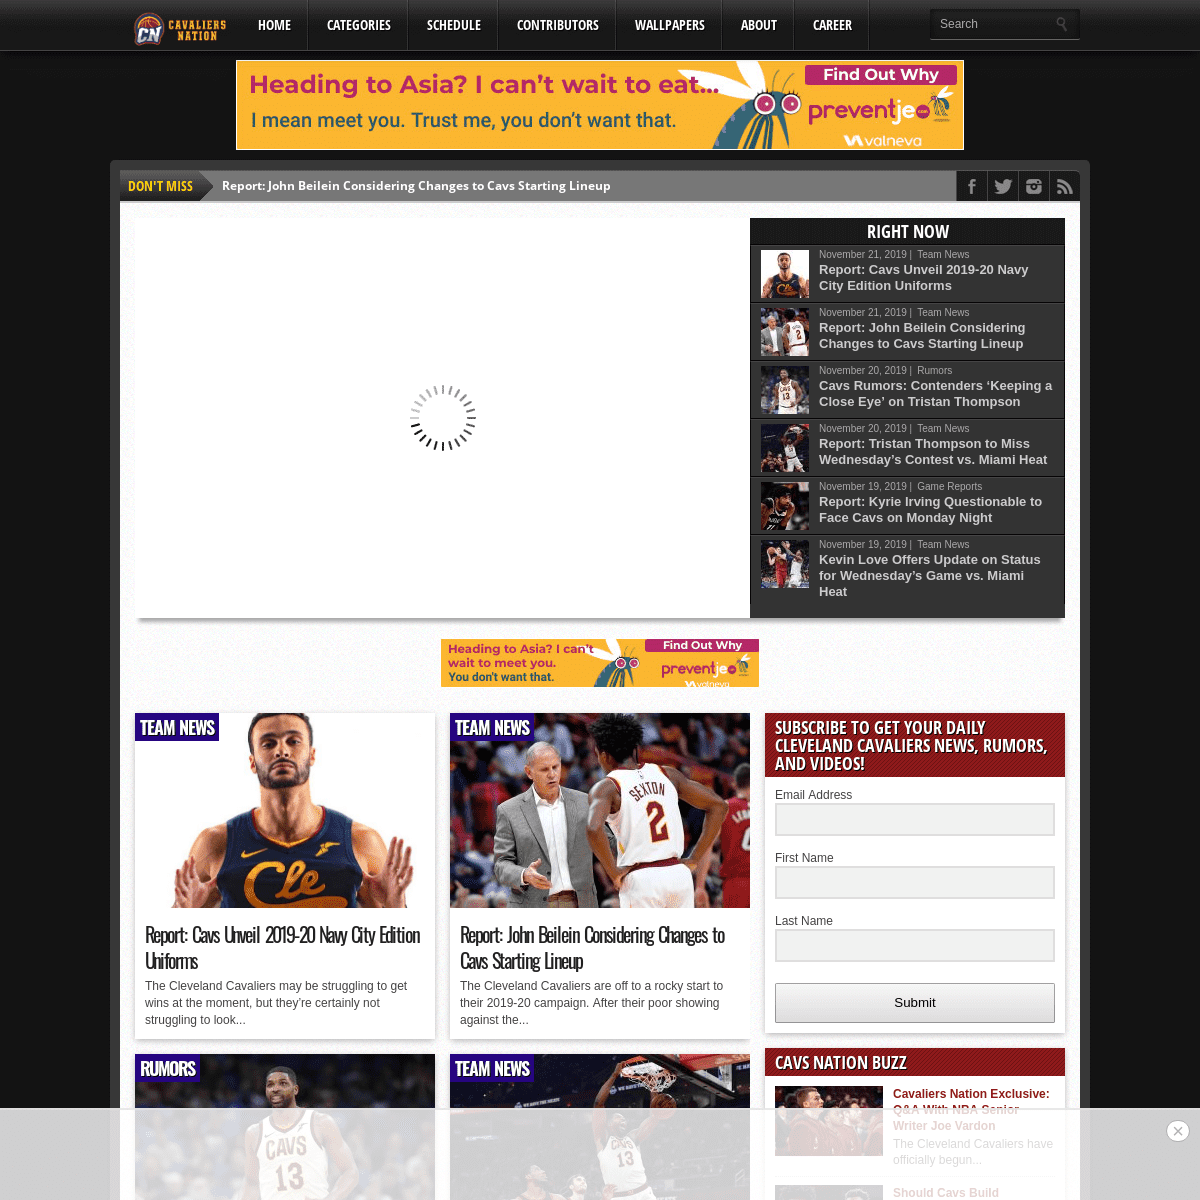 A complete backup of cavaliersnation.com